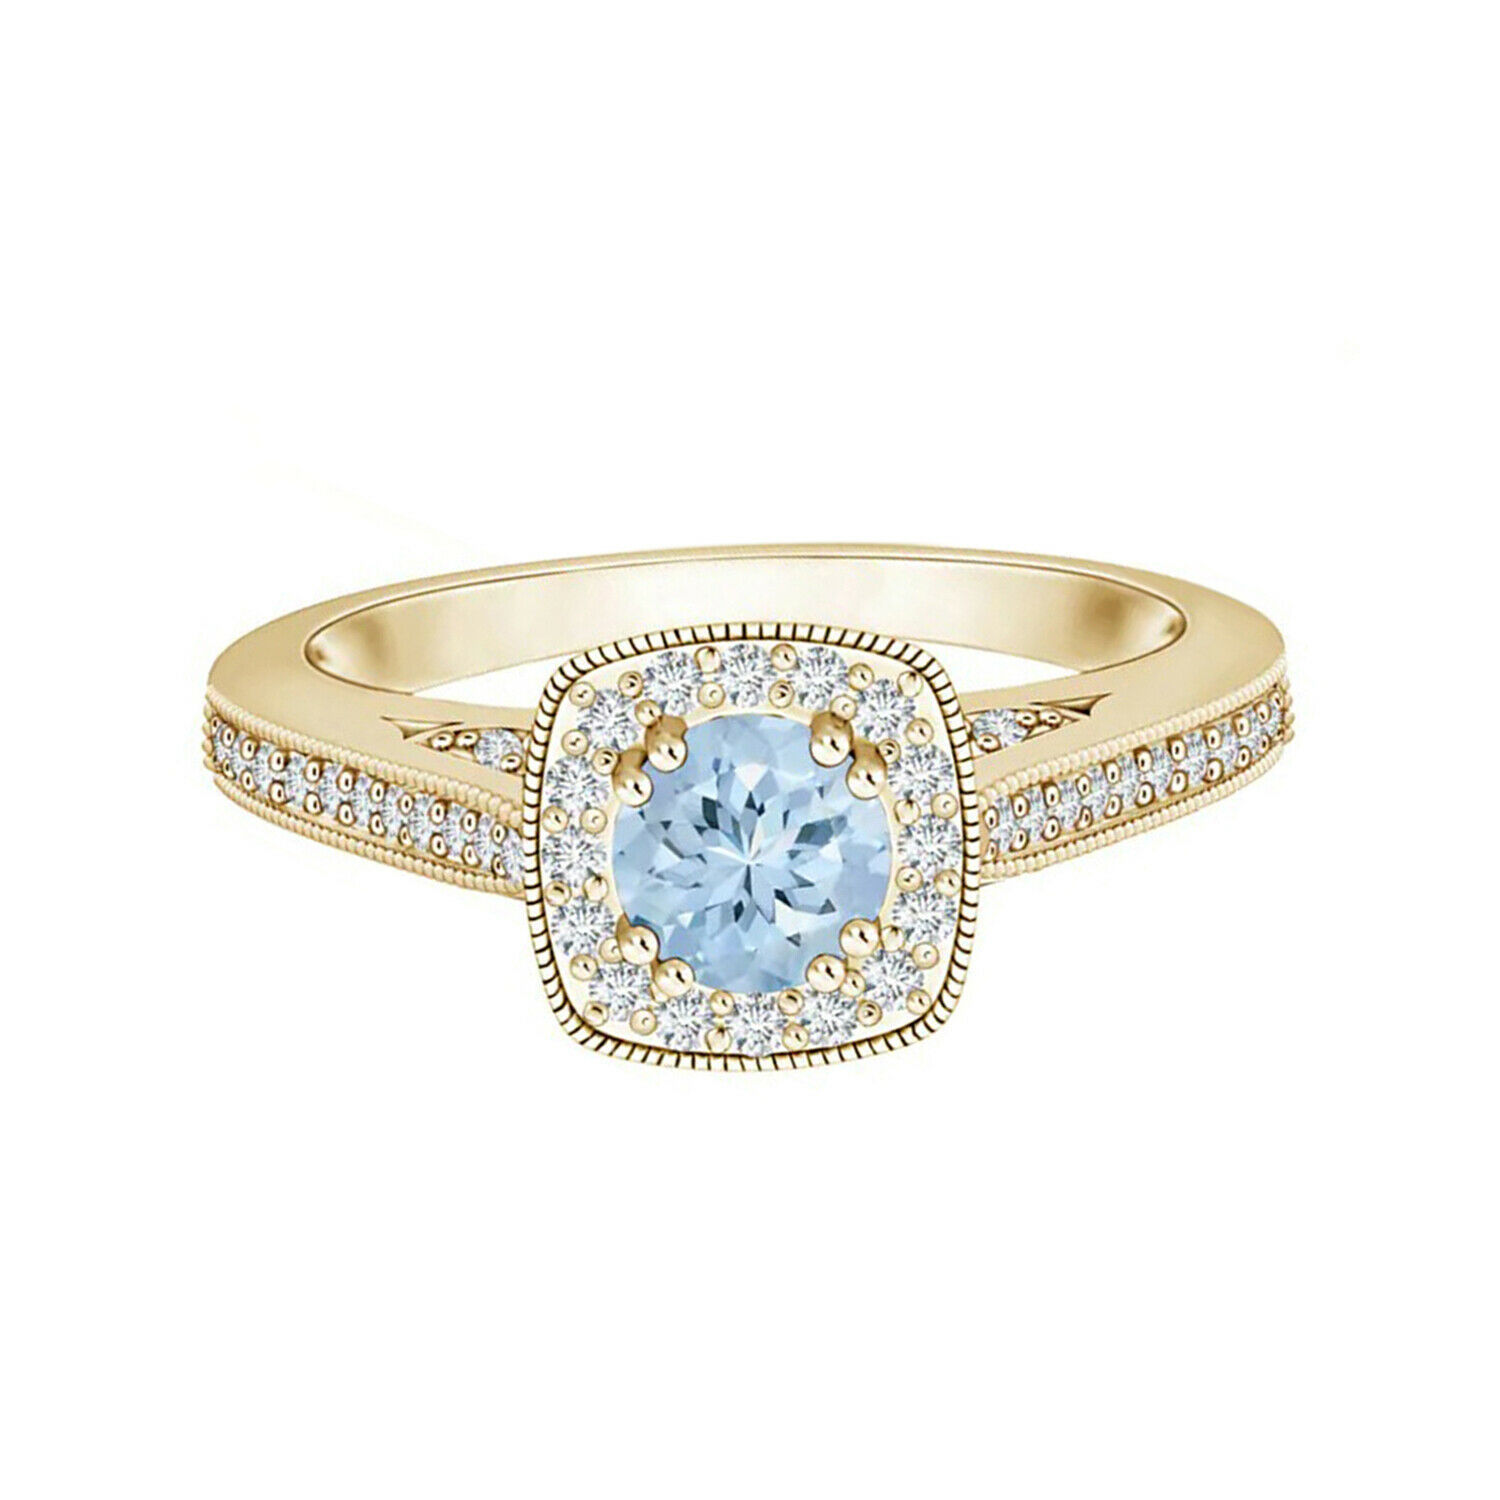 Aquamarine Halo Ring With Simulated Diamond Accents In 9K Yellow Gold